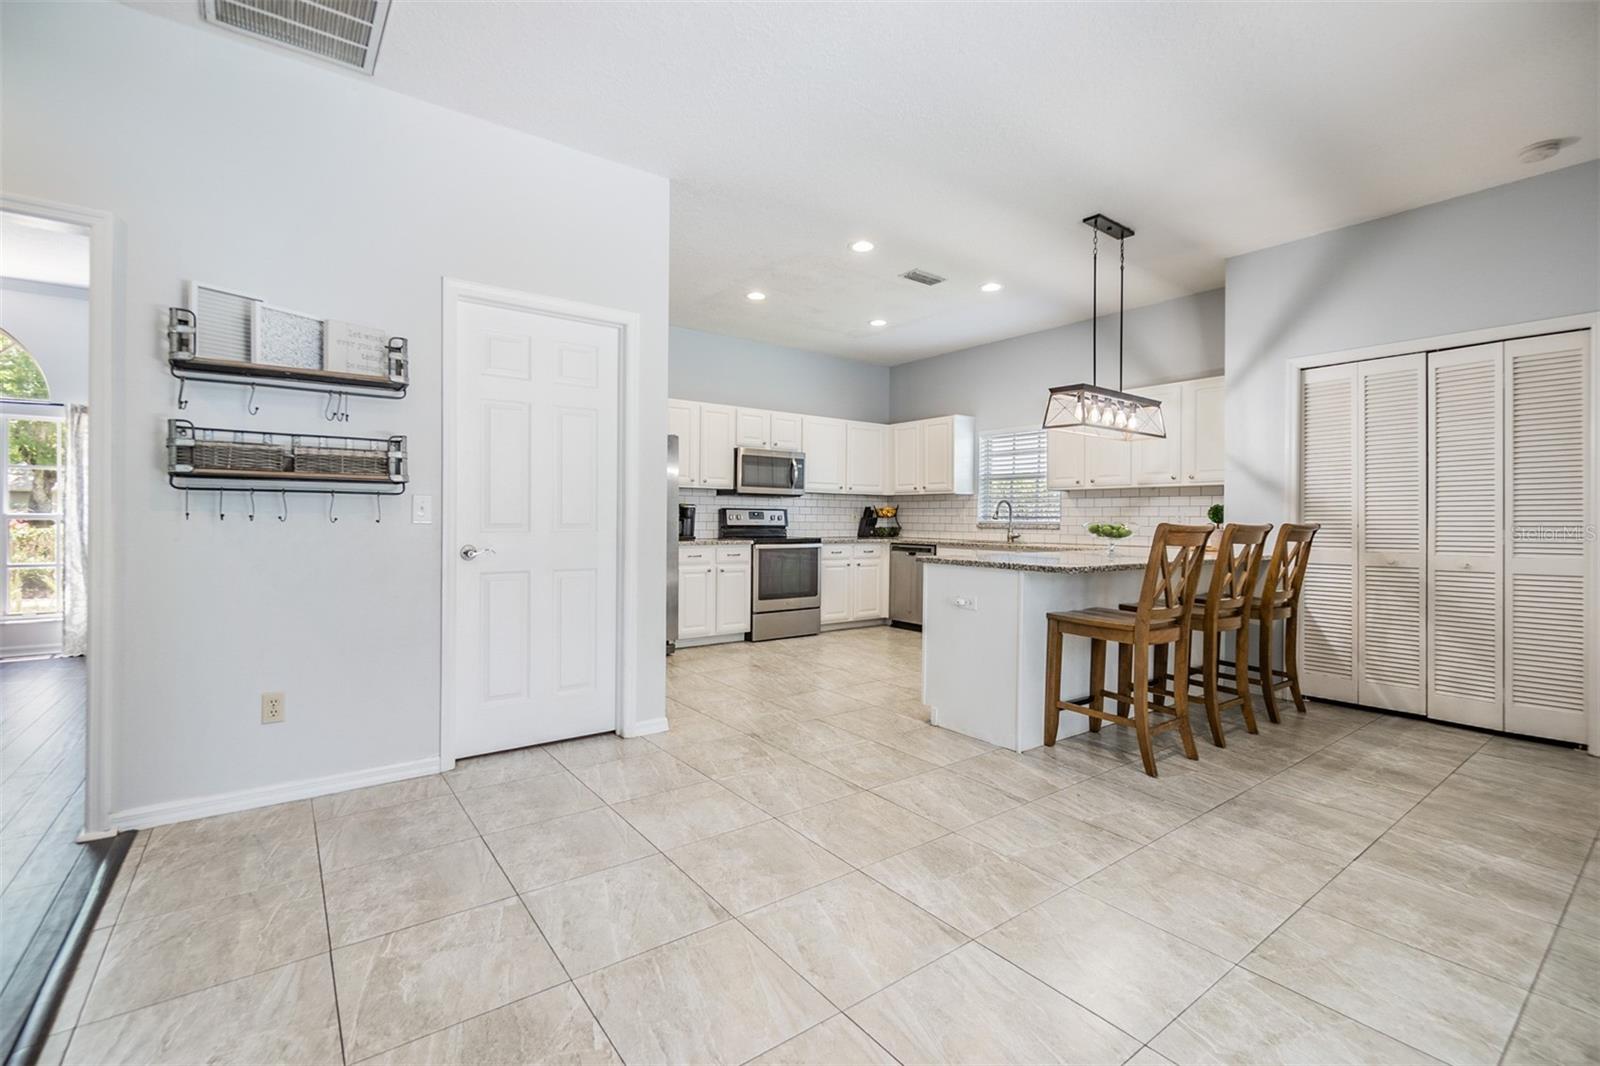 Large and Open kitchen with new light fixture, inset lighting, Subway tile backsplash, Granite Countertops, and Stainless Steel appliances.